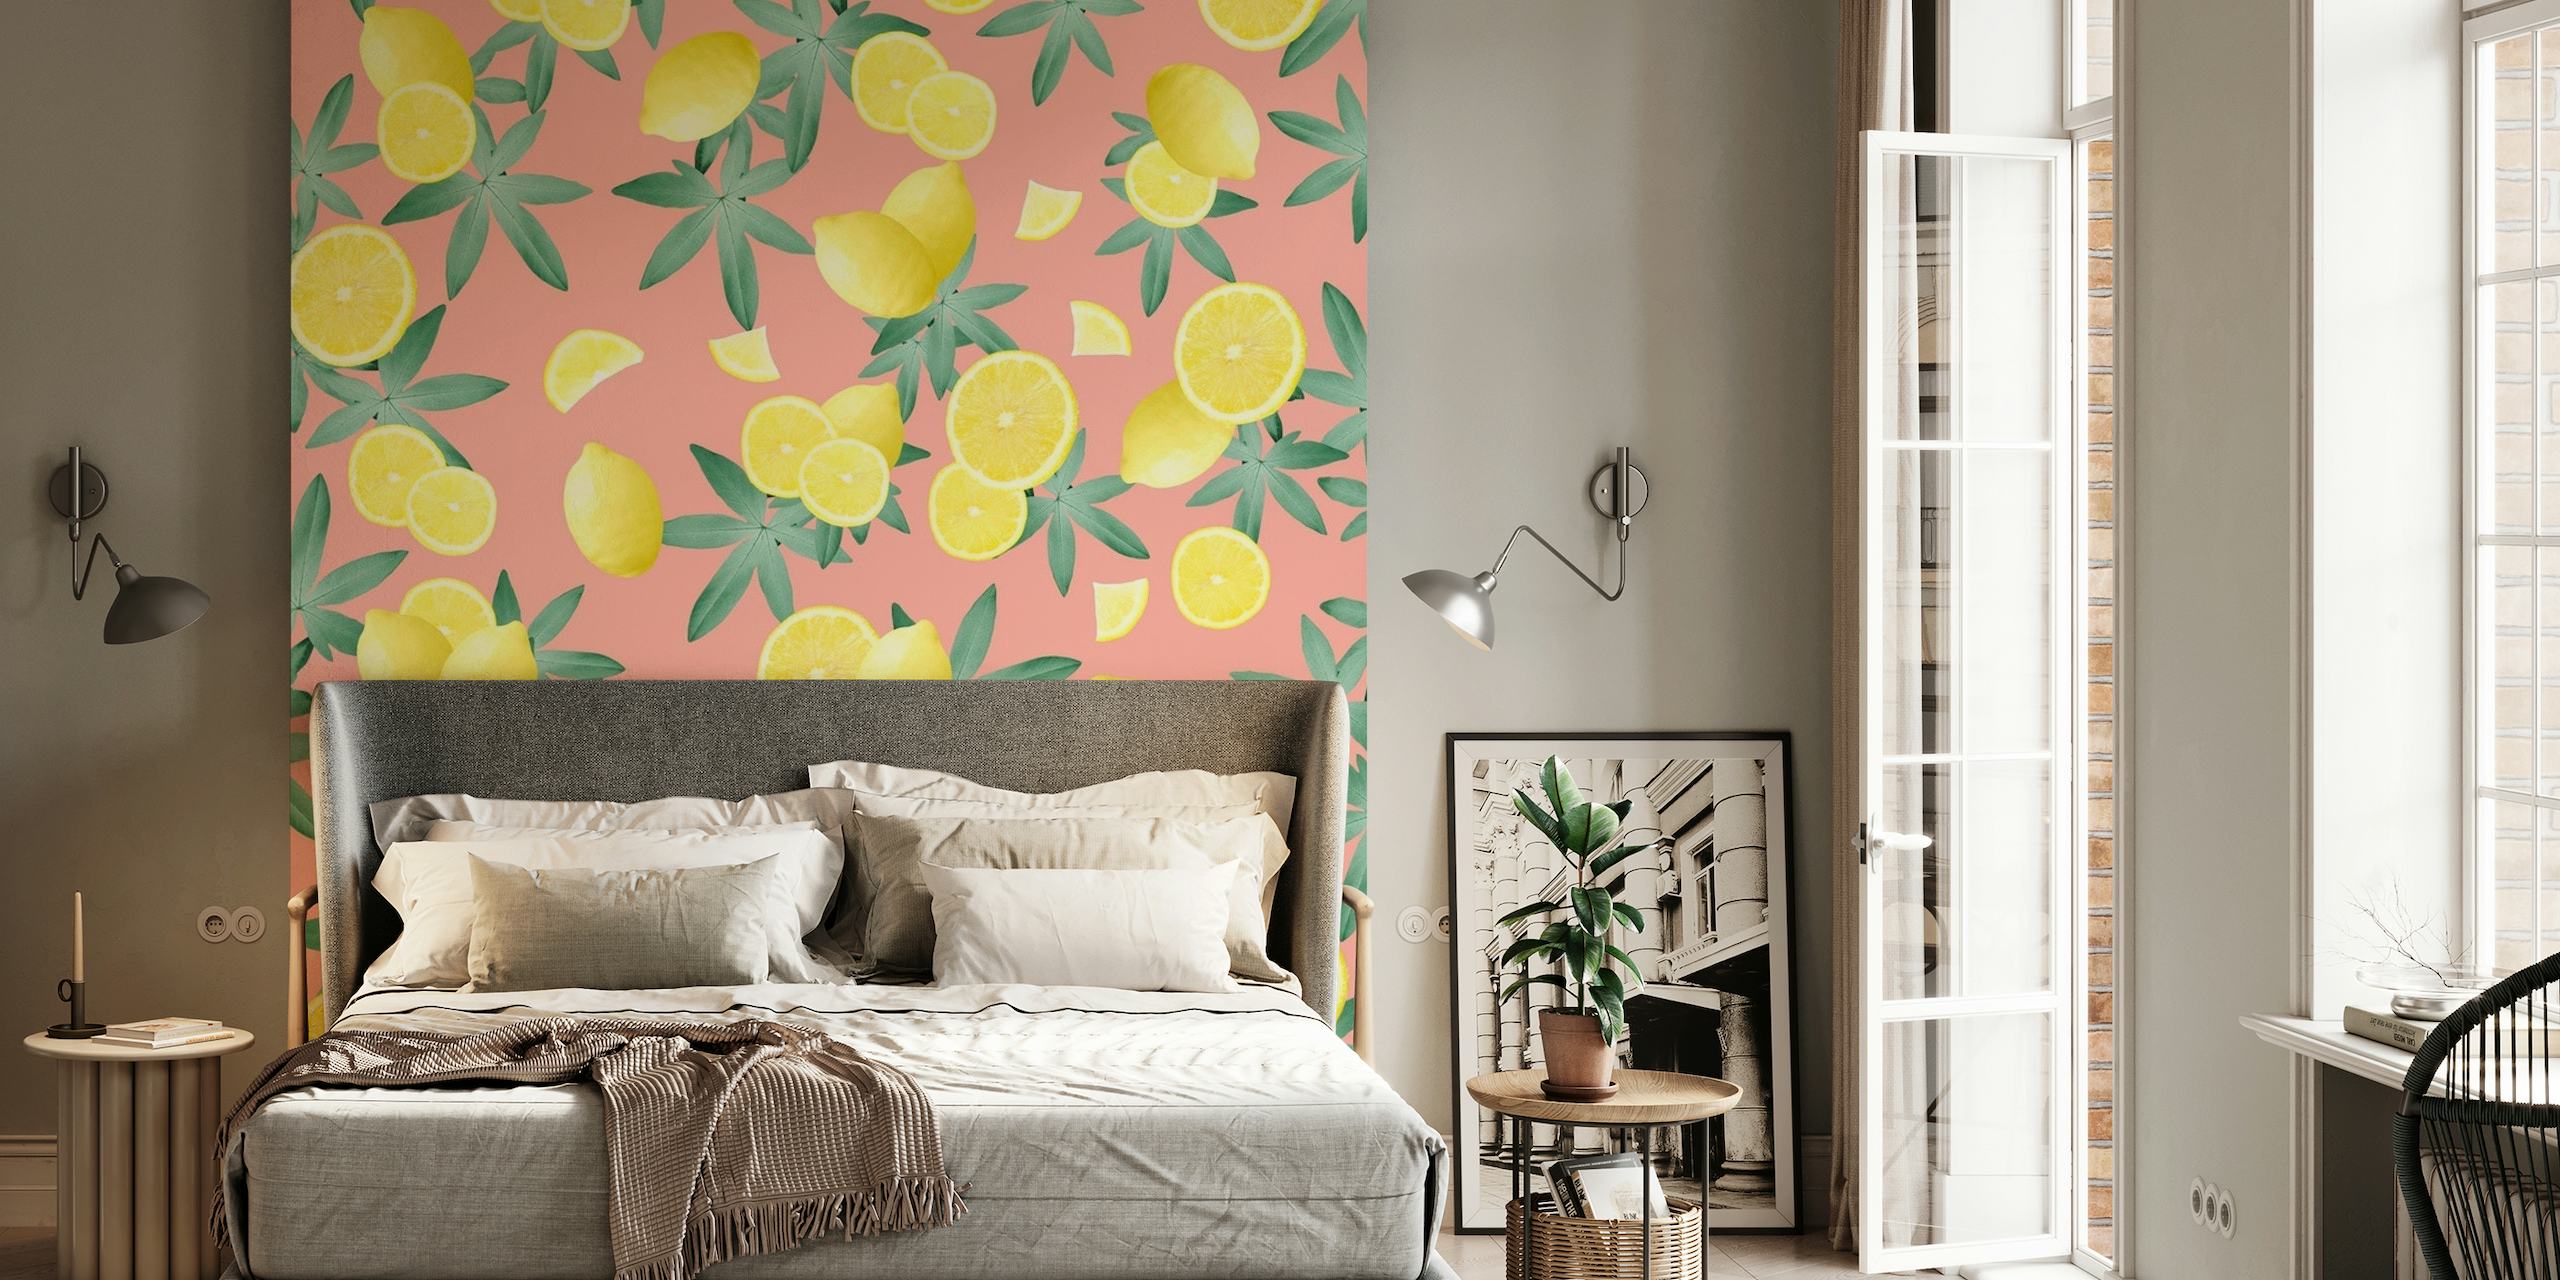 Lemon-patterned wall mural with coral background